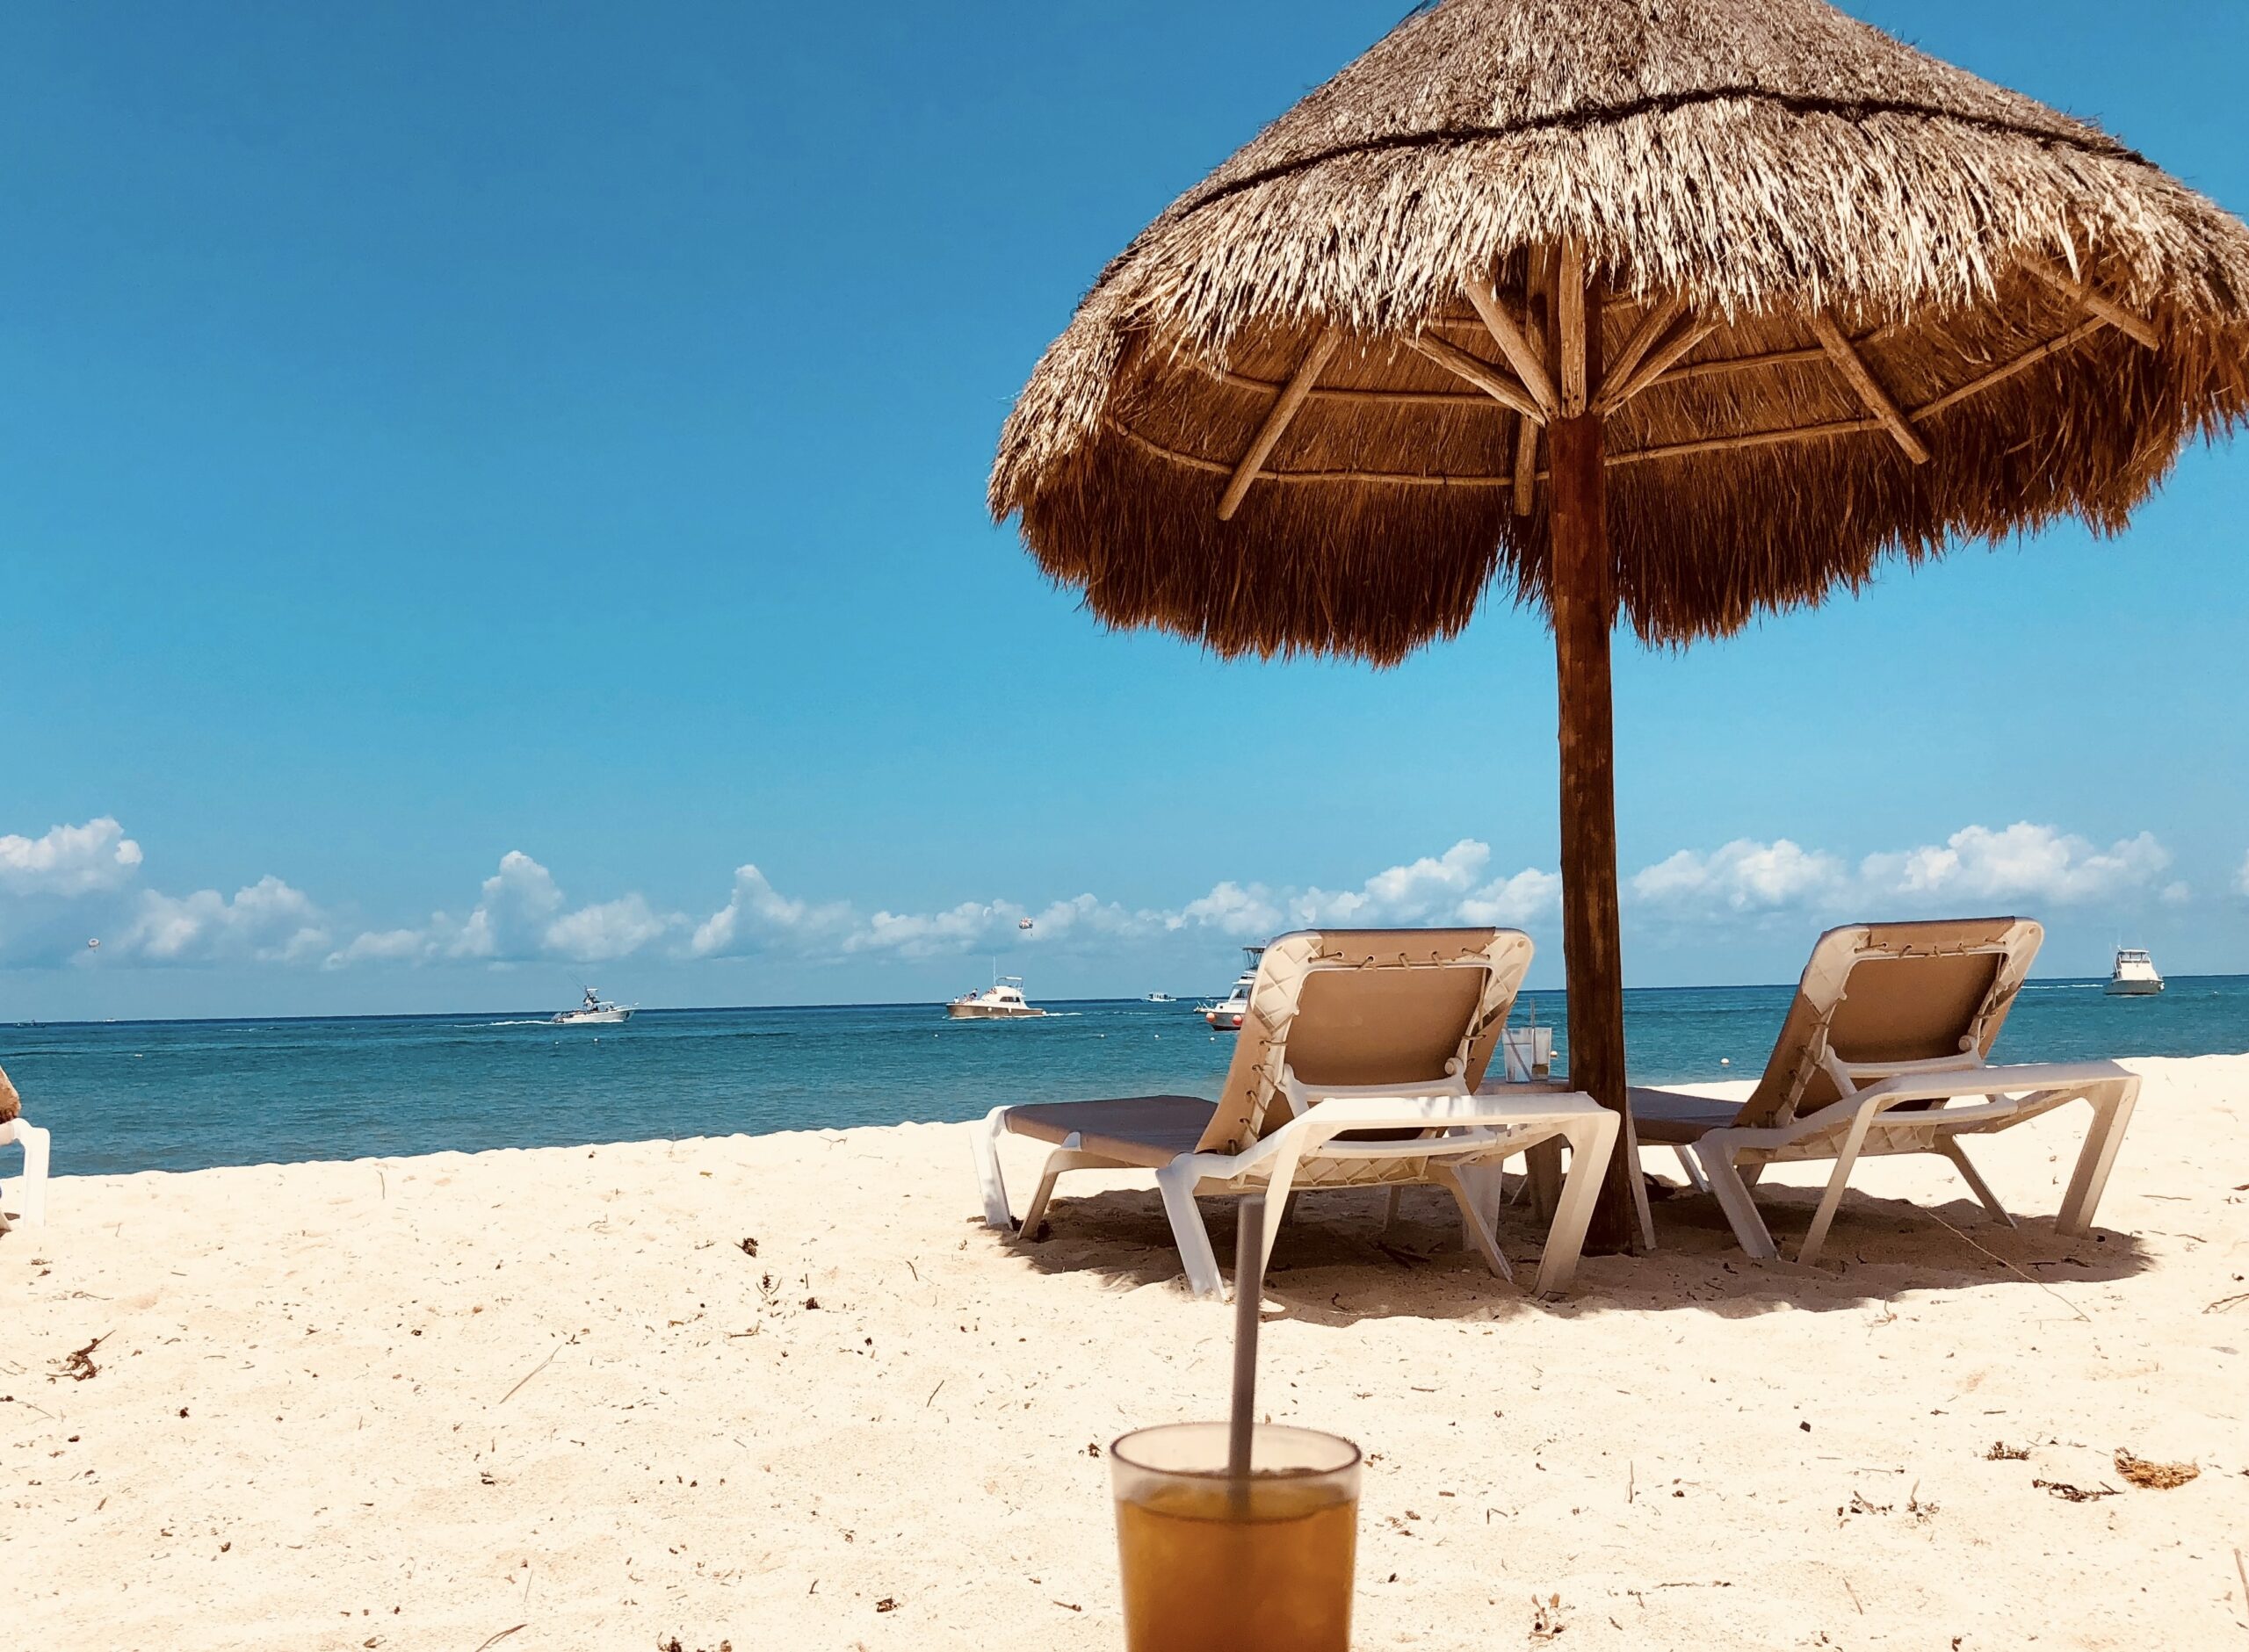 Cozumel, Mexico is one of the most popular vacation spots in Mexico. Learn more about the safe city.
Pictured: a Cancun beach with umbrellas and beach chairs on a sunny day 